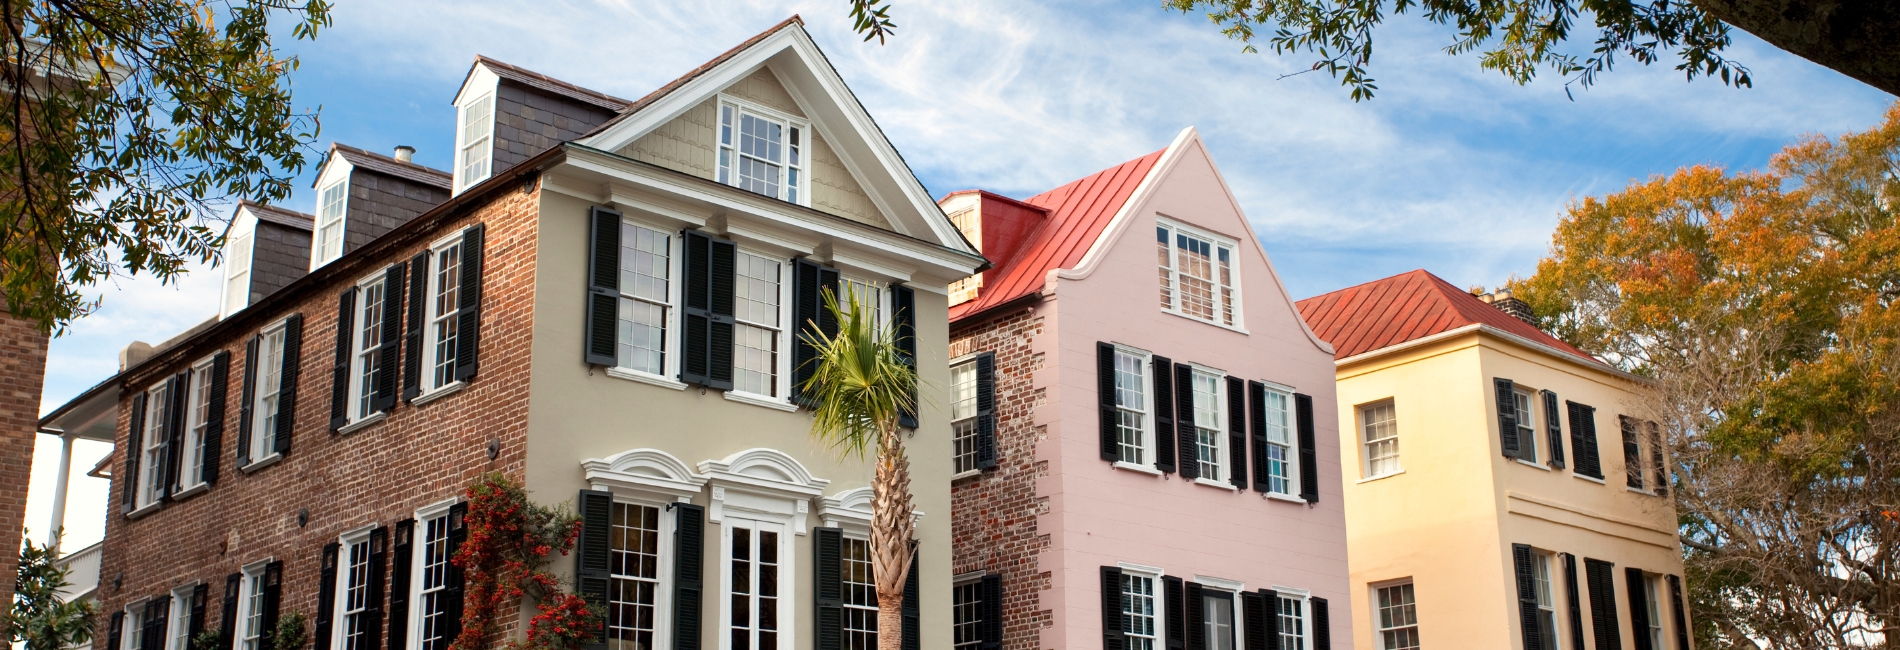 Search Charleston SC Real Estate - Nearby Homes For Sale - Matt O'Neill Real  Estate